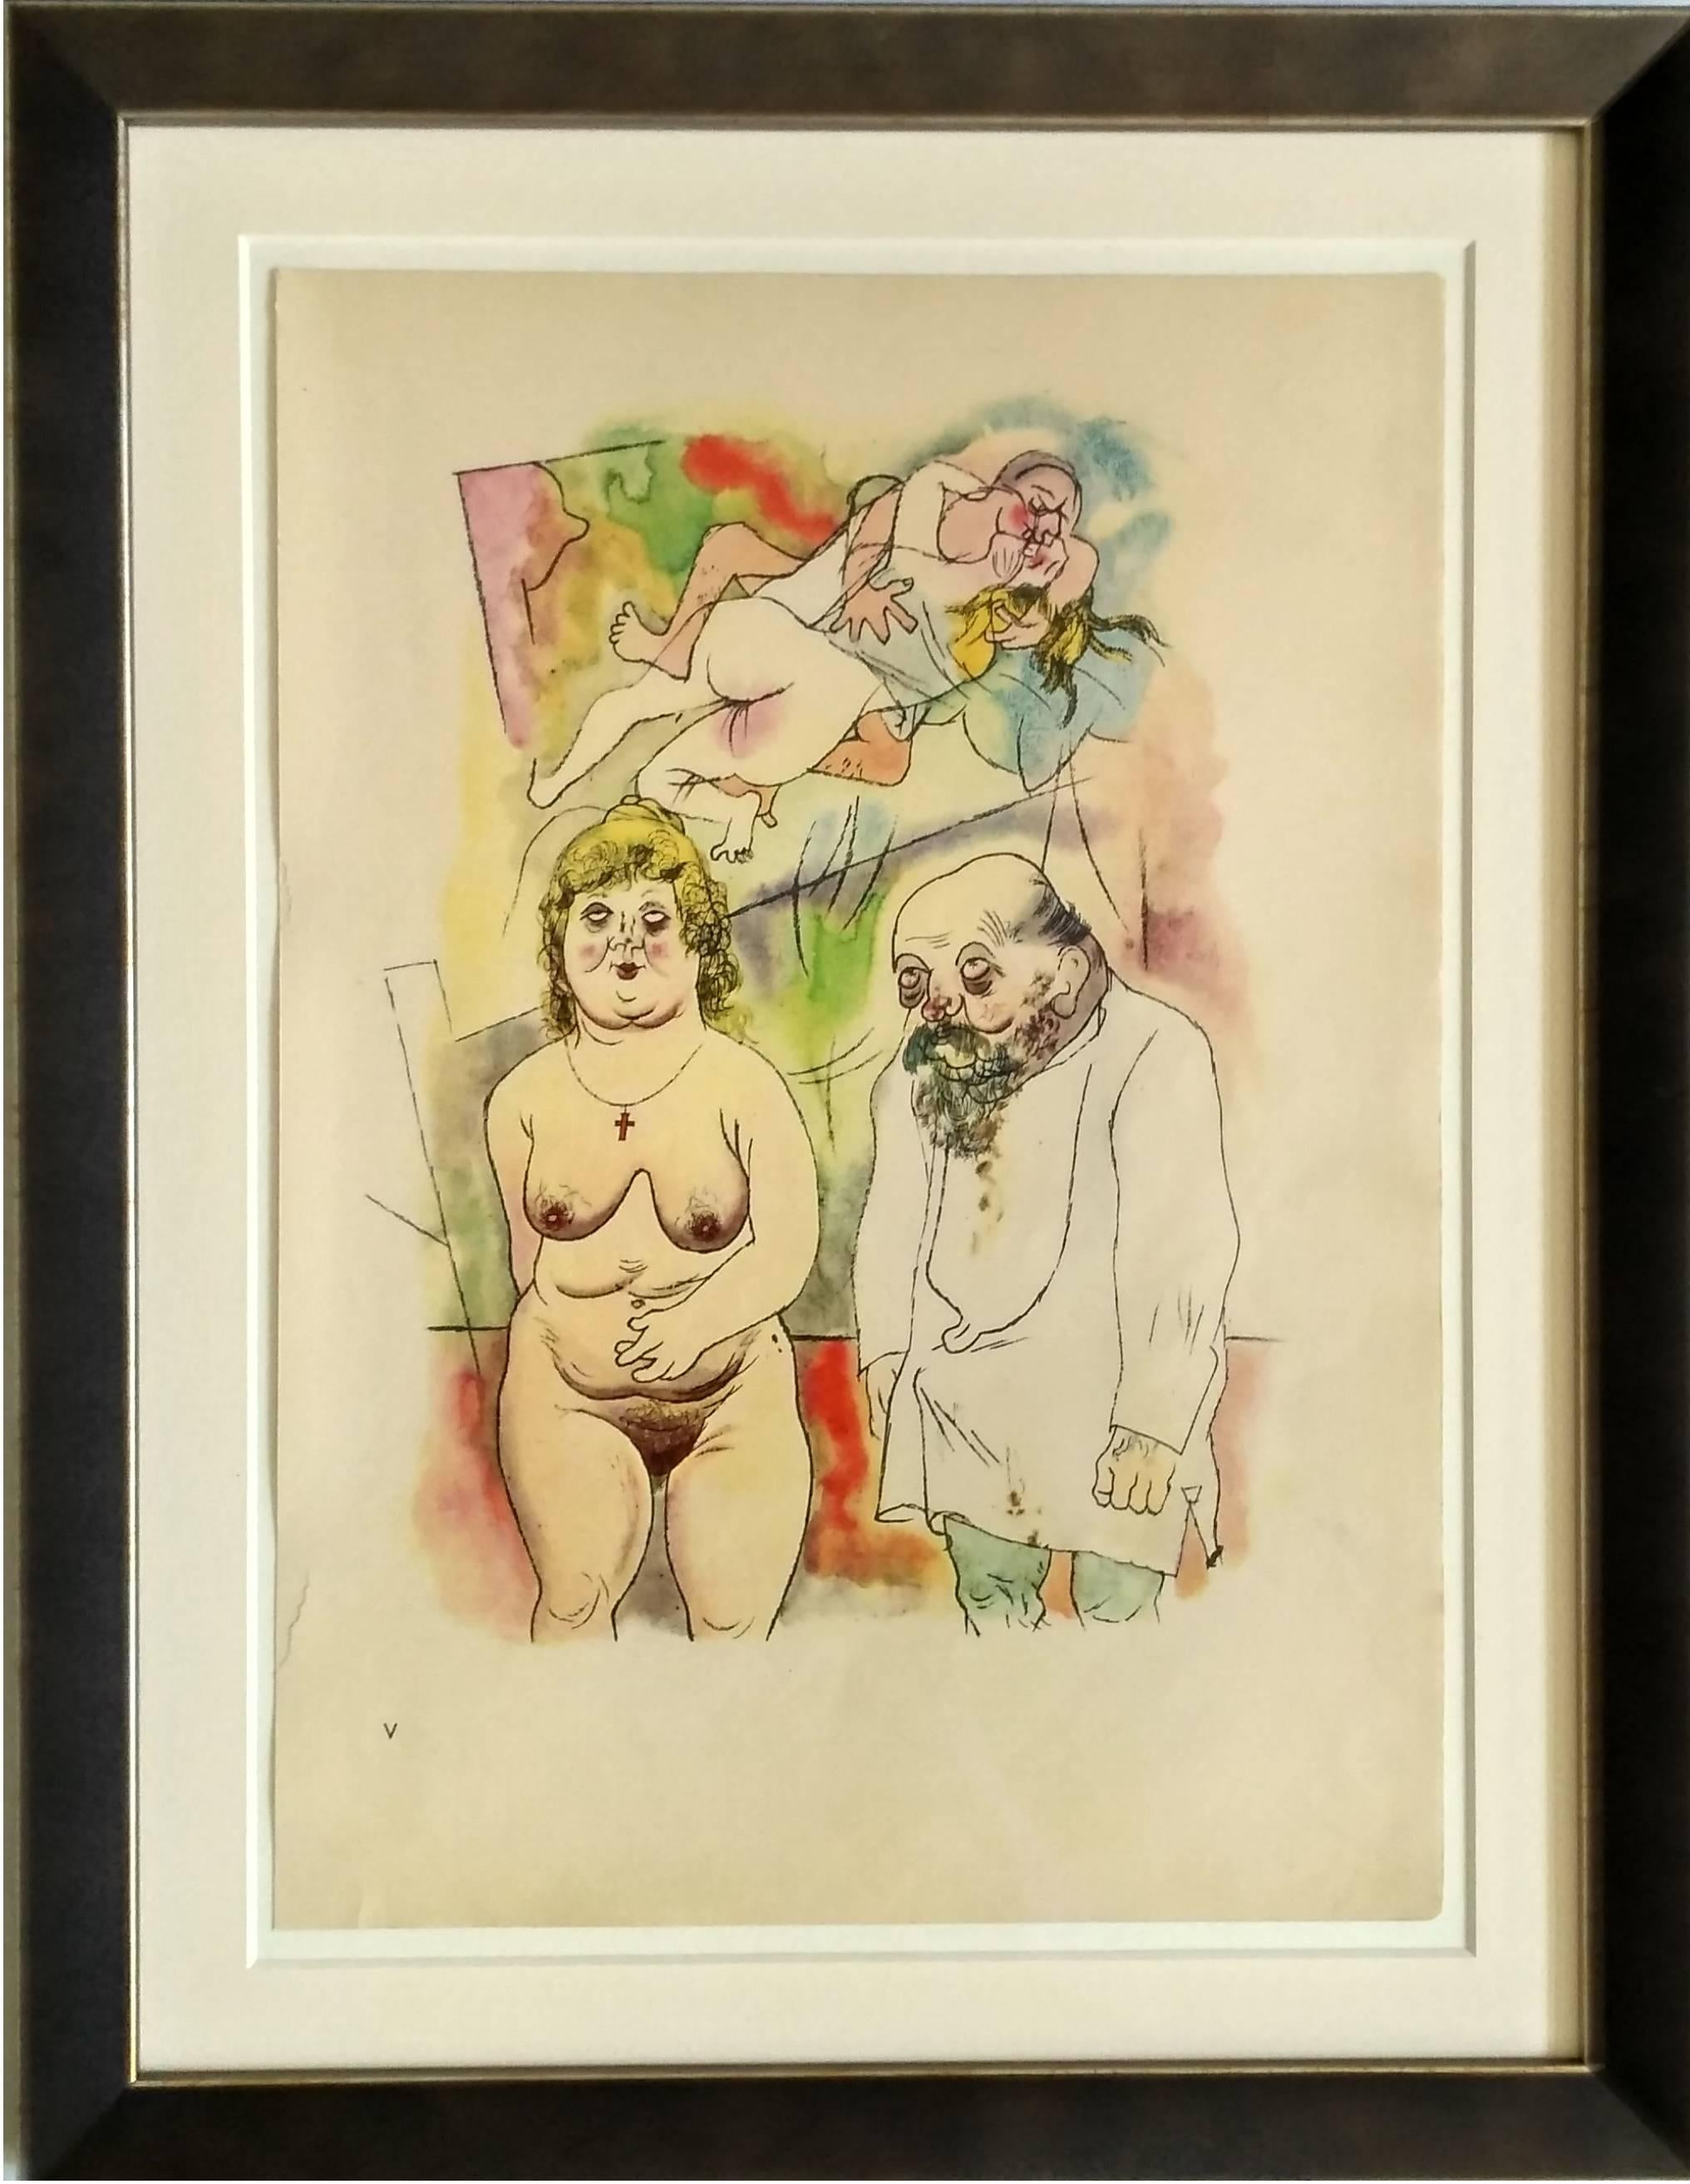 George Grosz "Pappi und Mammi" ( Daddy and Mommy ) Lithograph, 1922